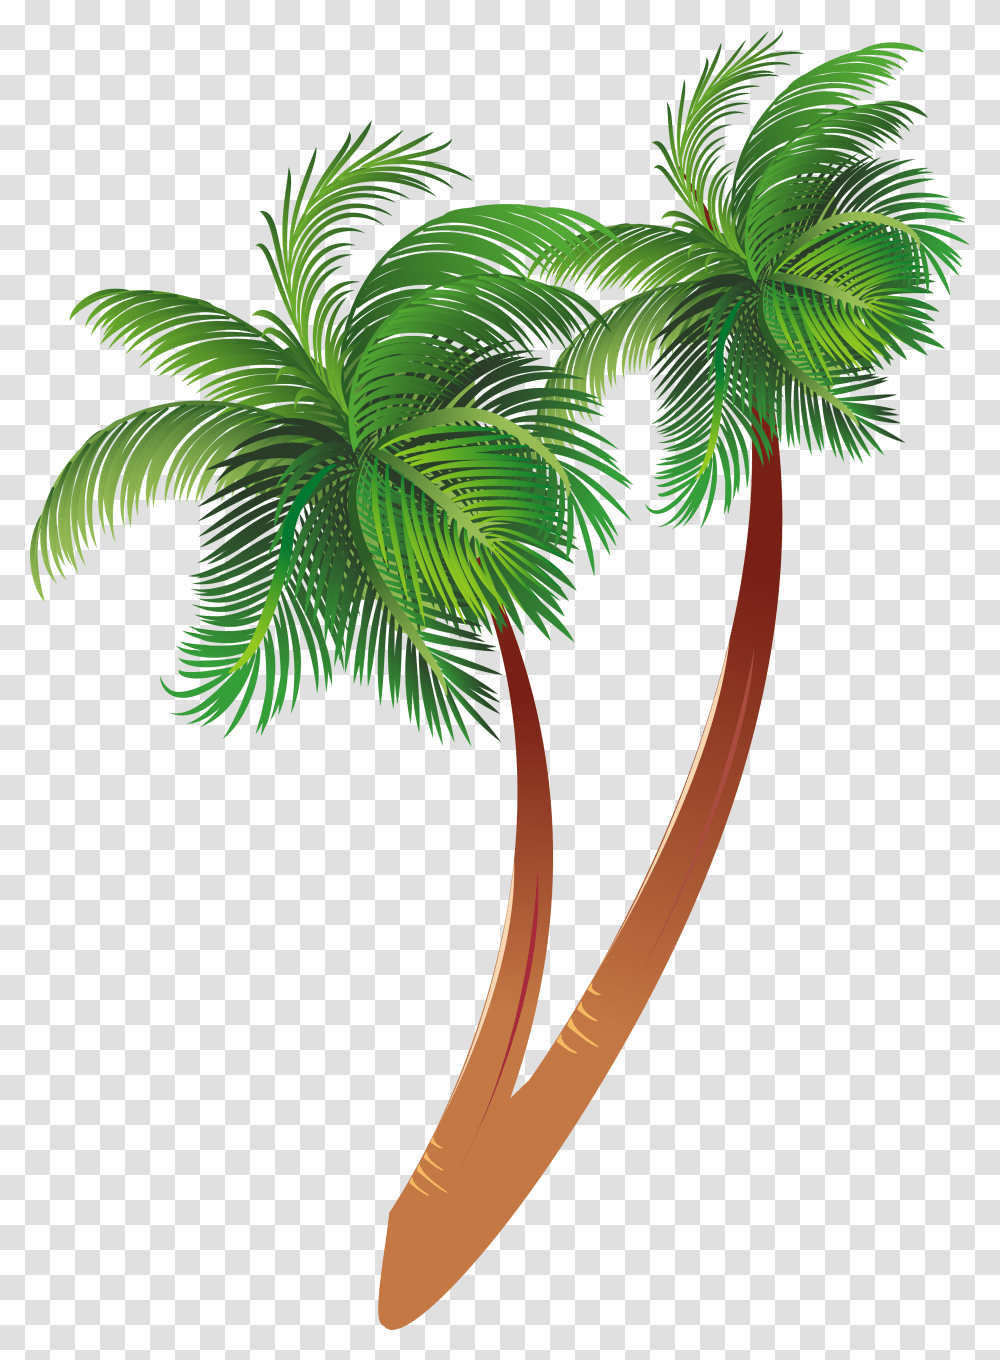 Free Cartoon Palm Tree Clipart Coconut Palm Background Palm Tree Clipart Transparent Png